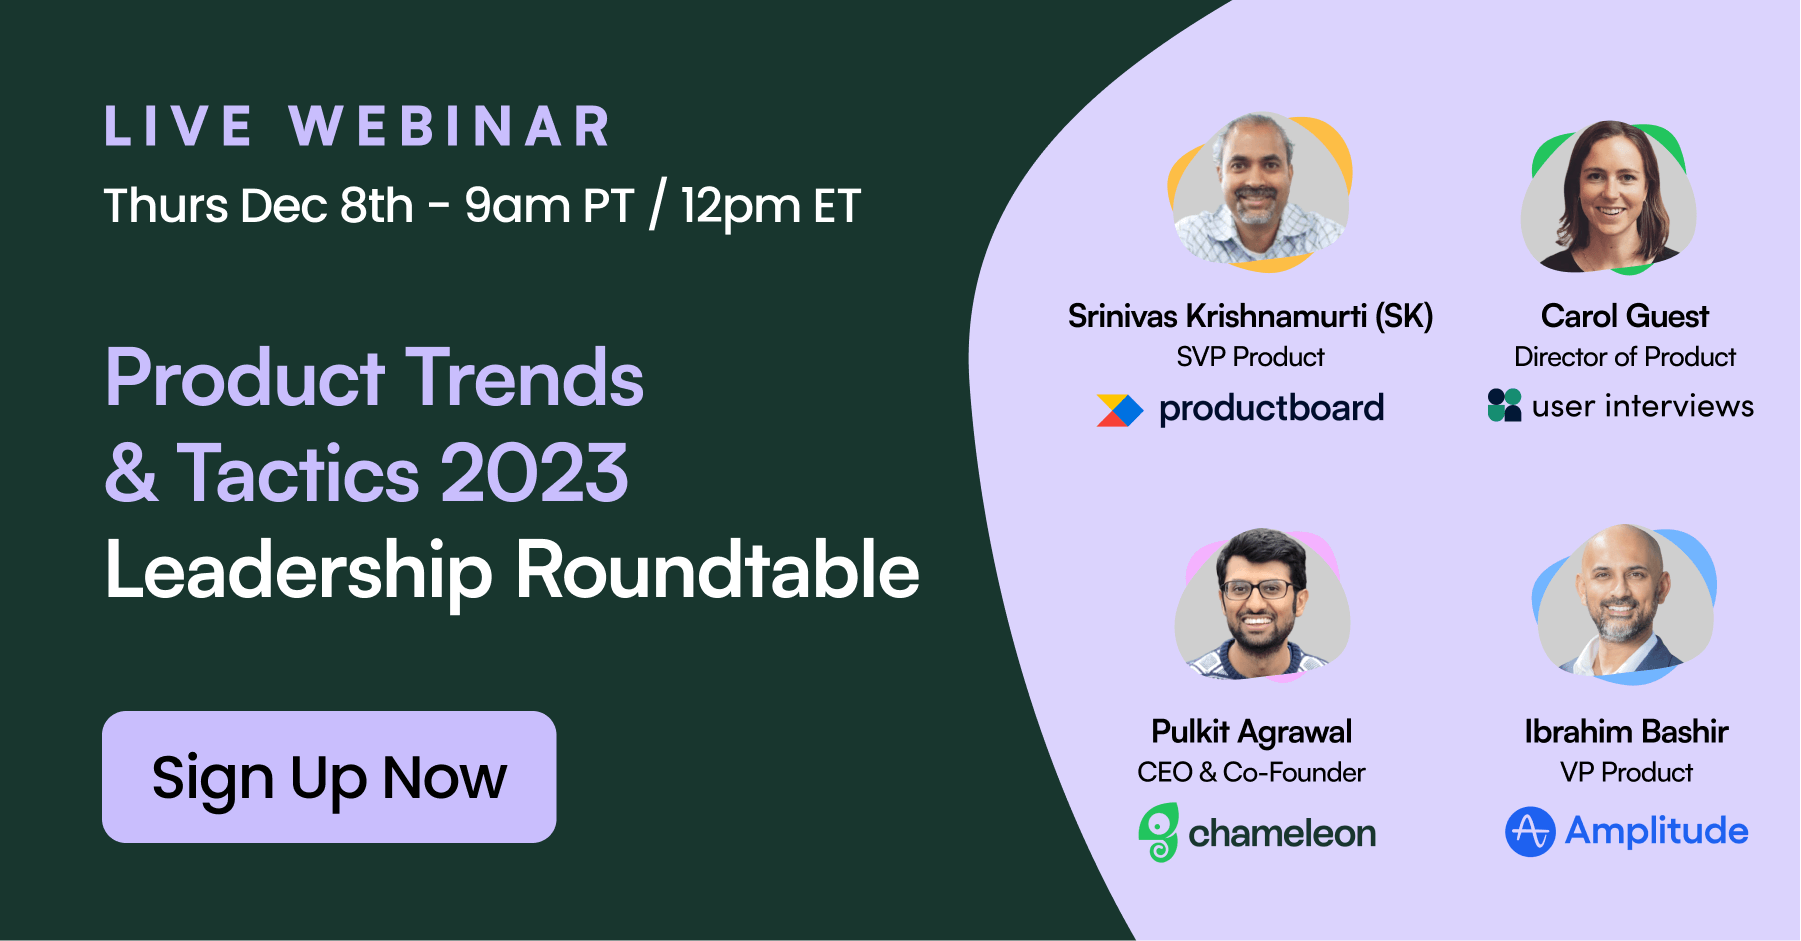 Product Trends & Tactics 2023 Leadership Roundtable